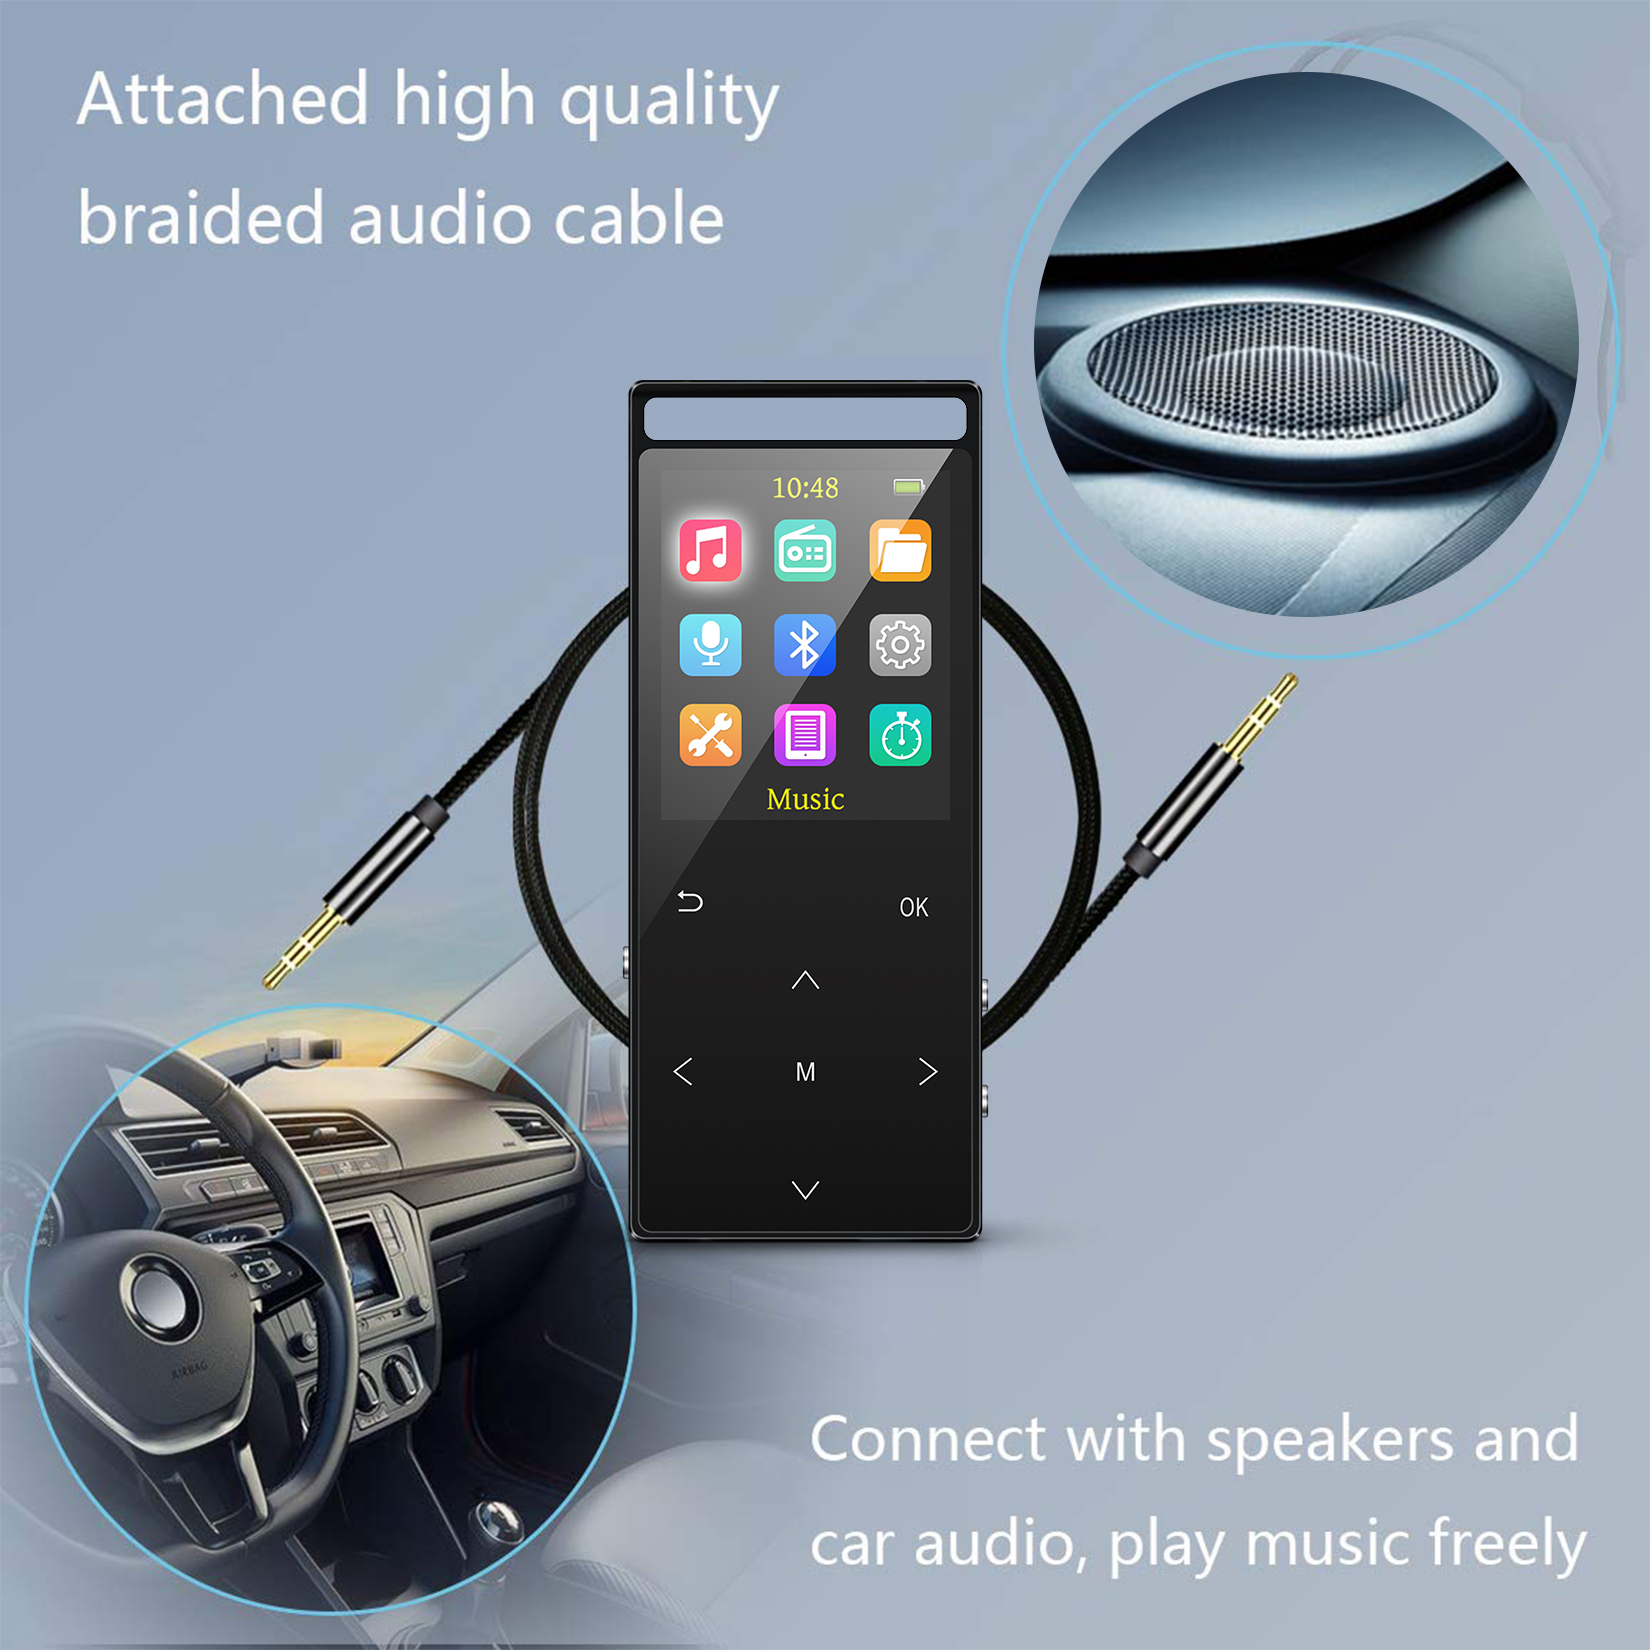 MP3 Player, MUSBOY 128GB Bluetooth 5.0, Portable Music Player with FM Radio, with Speaker, Touch Button，Alarm Clock, Stopwatch, Calendar. - image 2 of 7